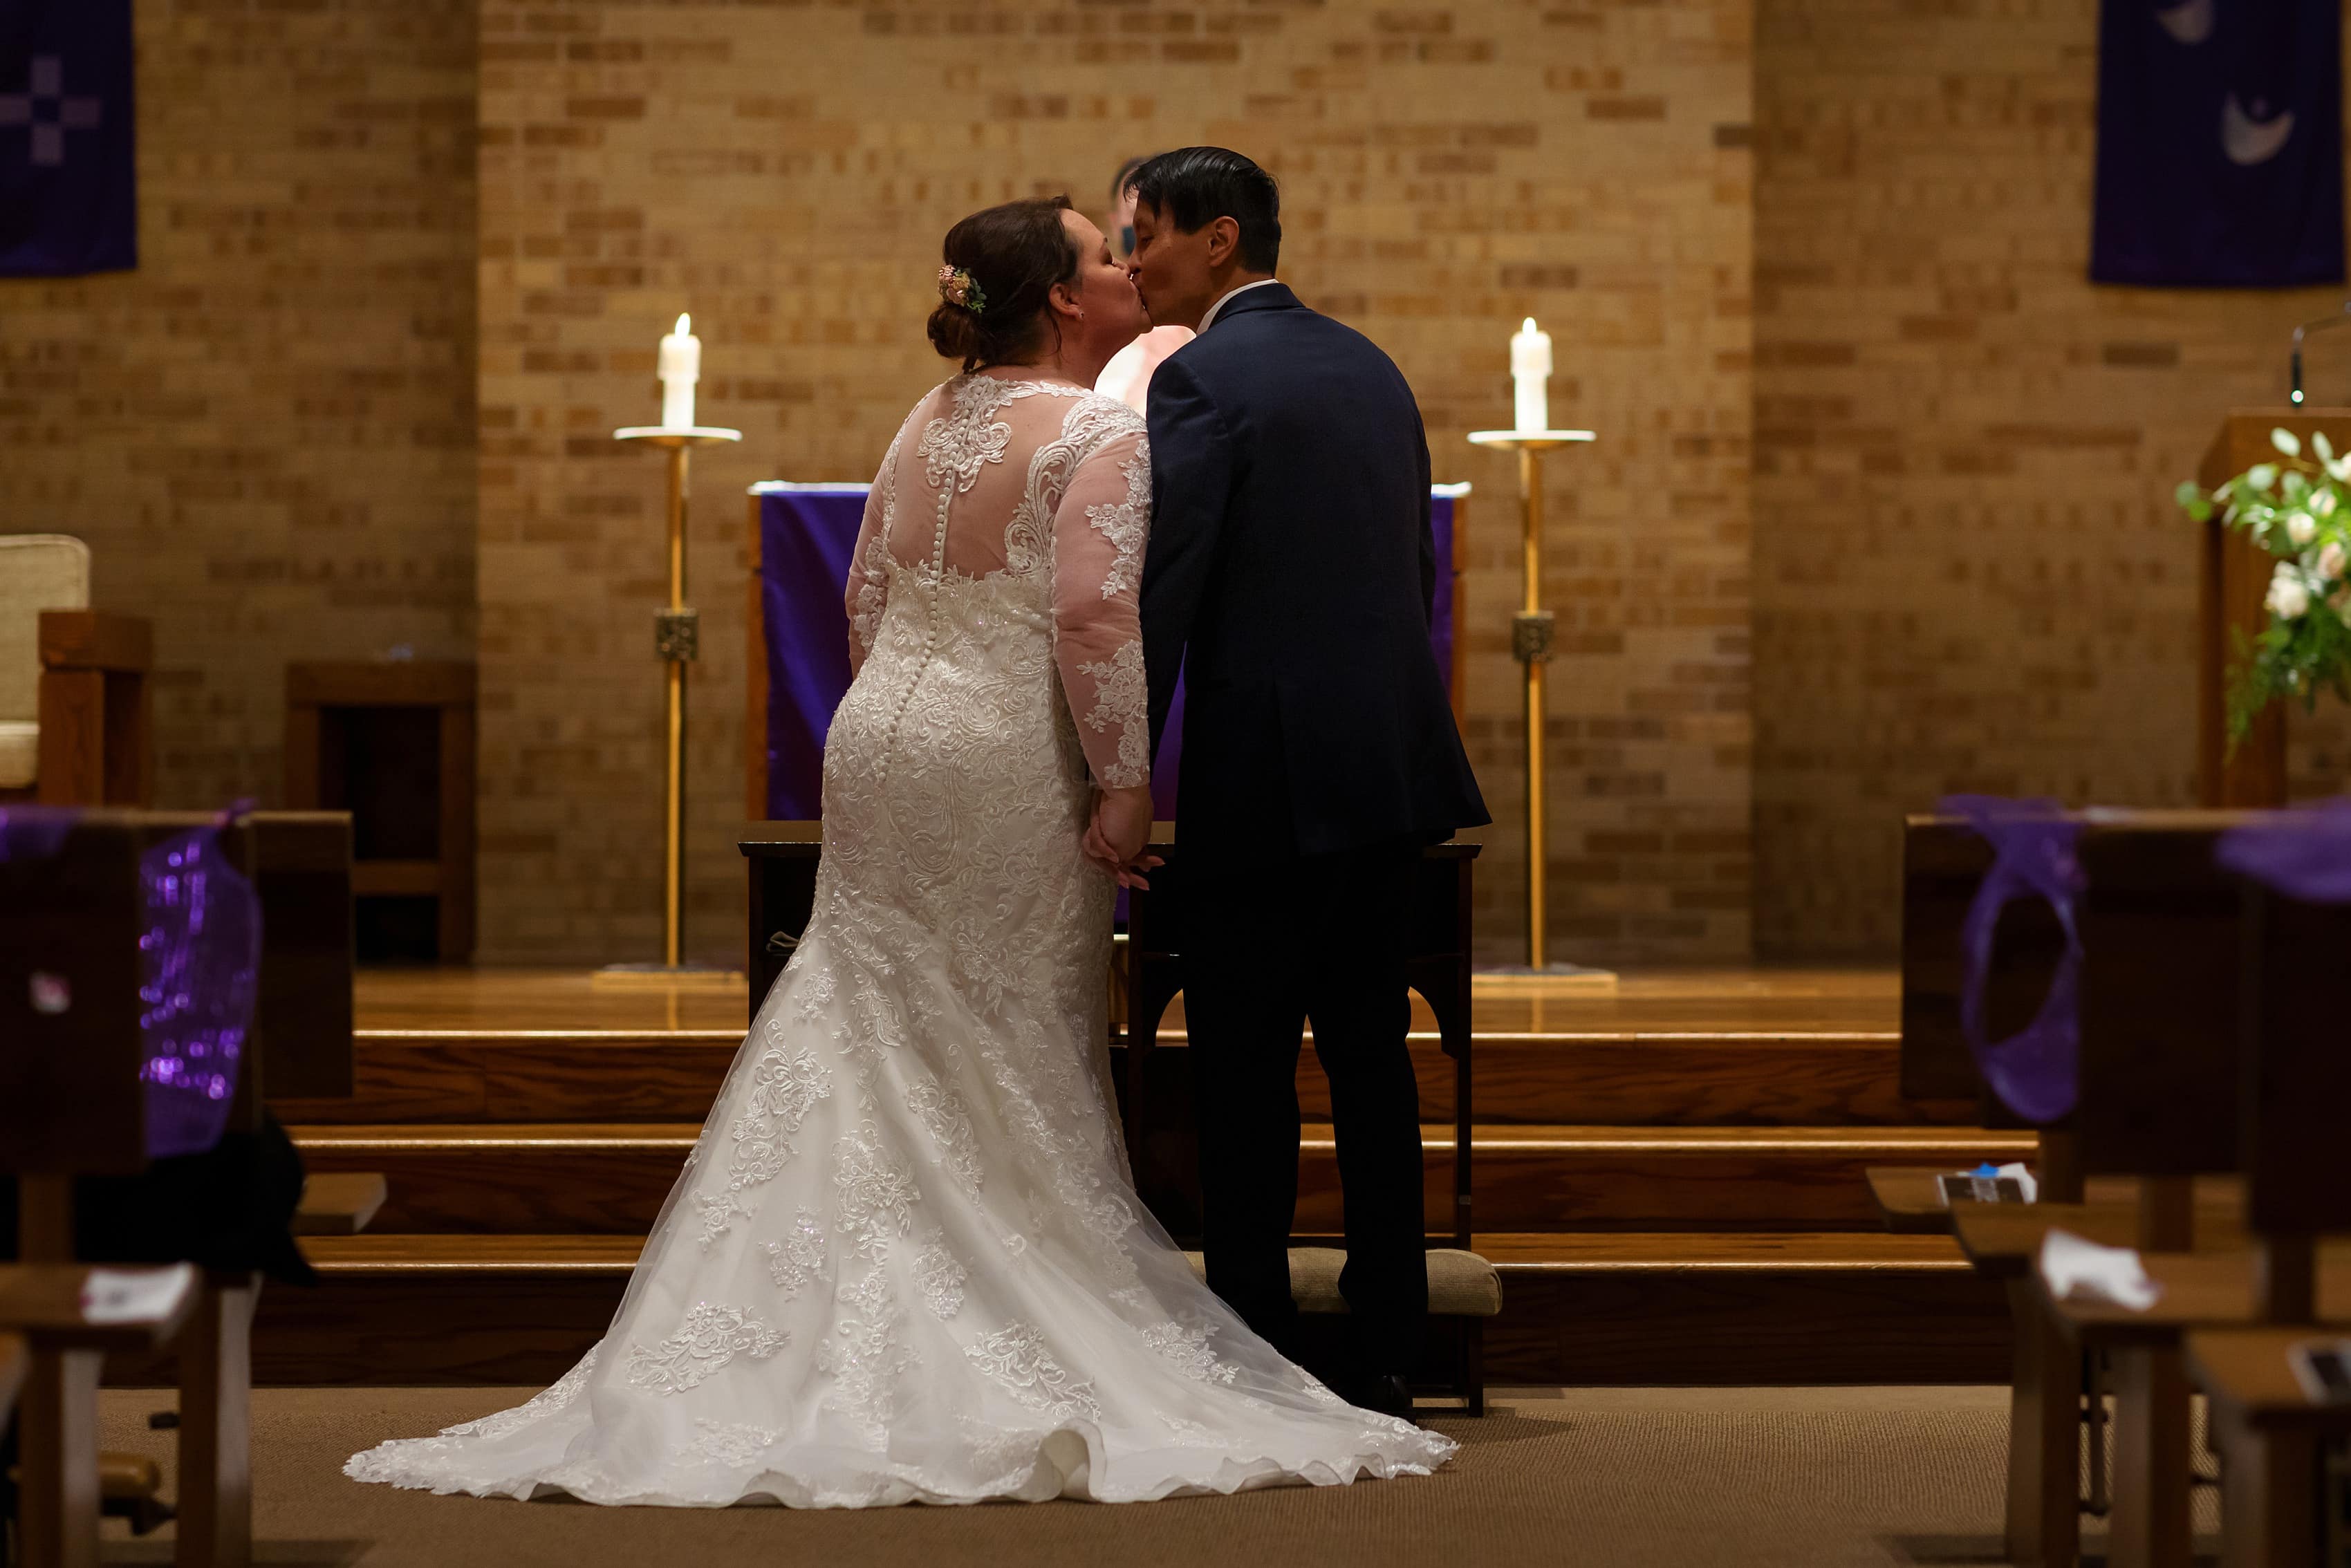 bride and groom share first kiss during wedding ceremony at St. Scholastica parish